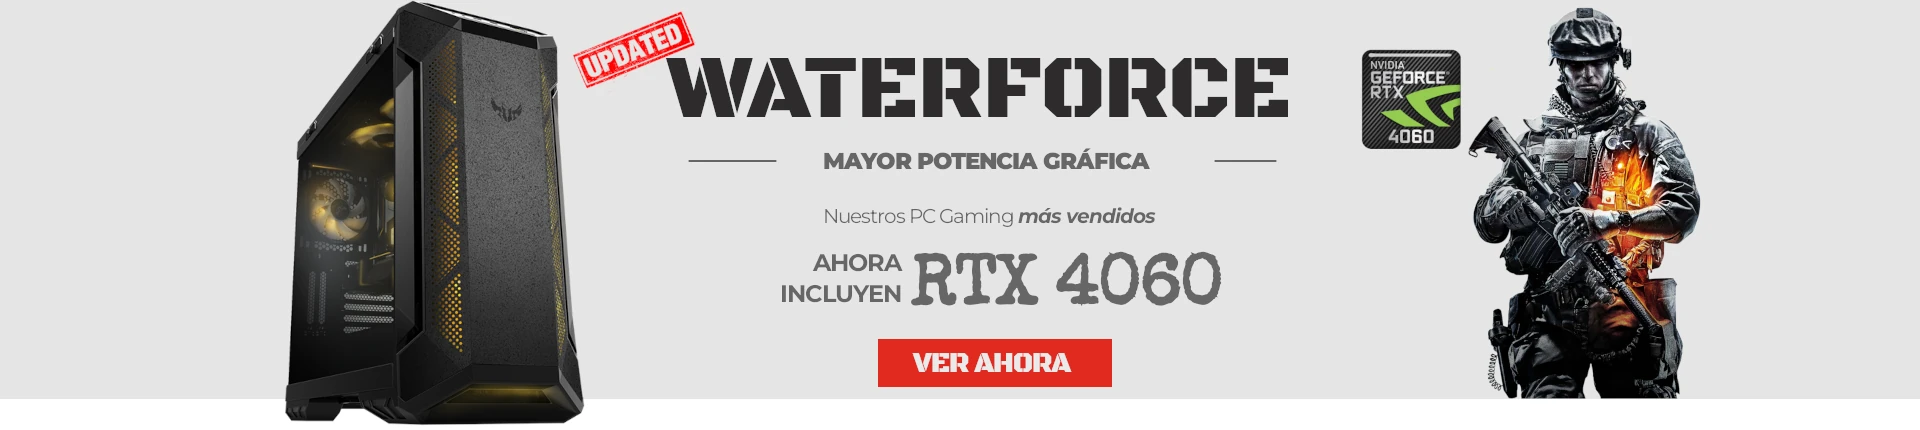 Epical-Q Waterforce ahora con RTX 4060